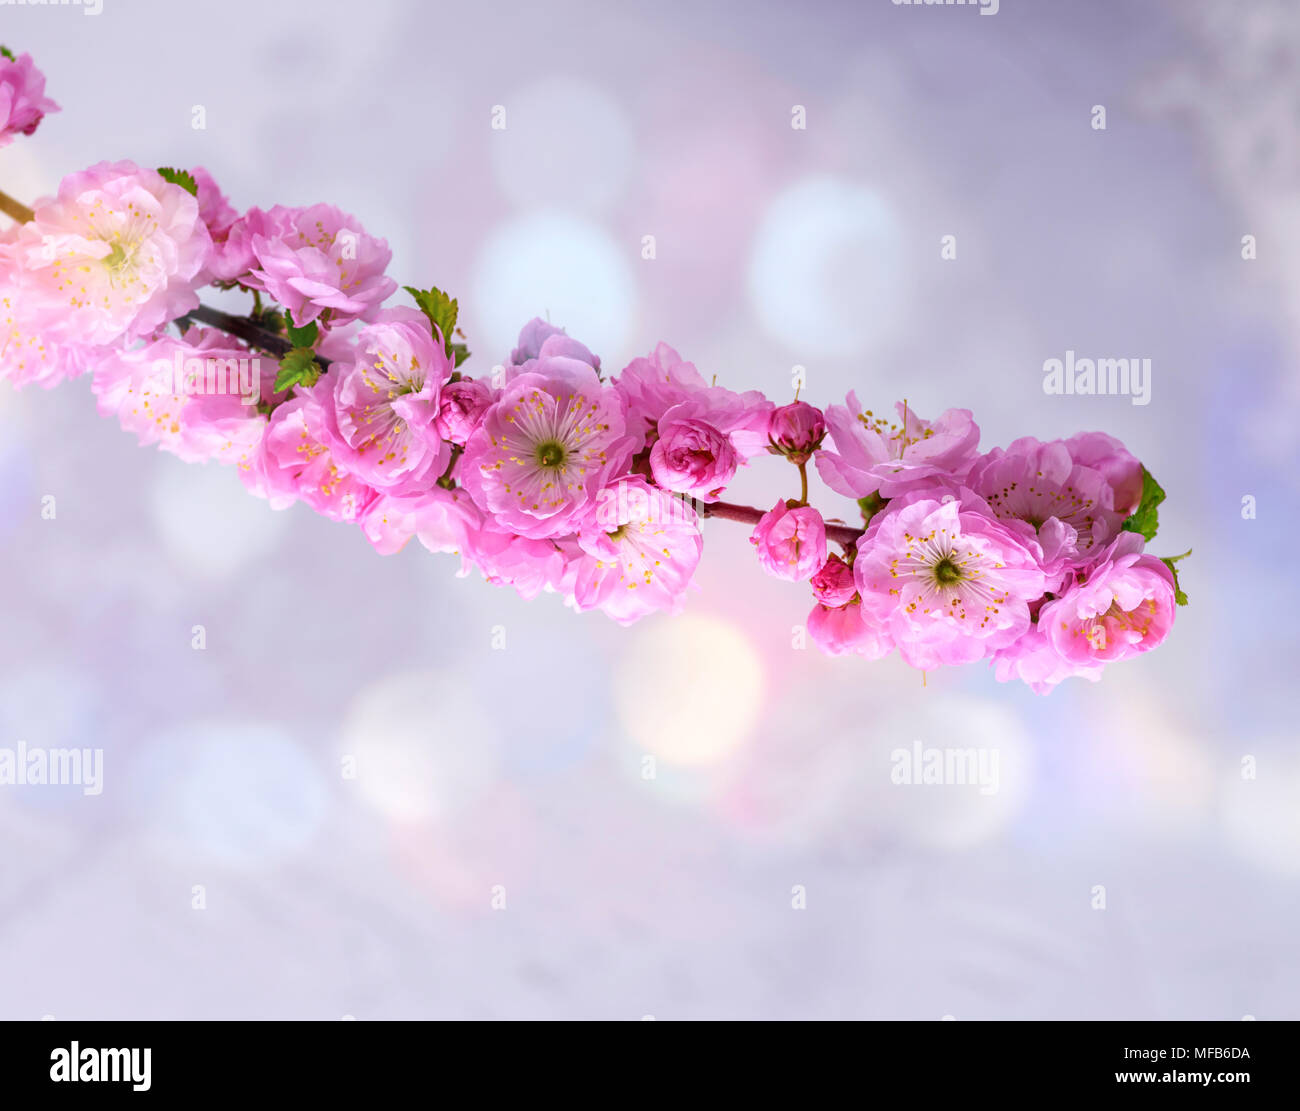 branches with pink flowers Louiseania triloba on a blue background or almonds trilobate Stock Photo